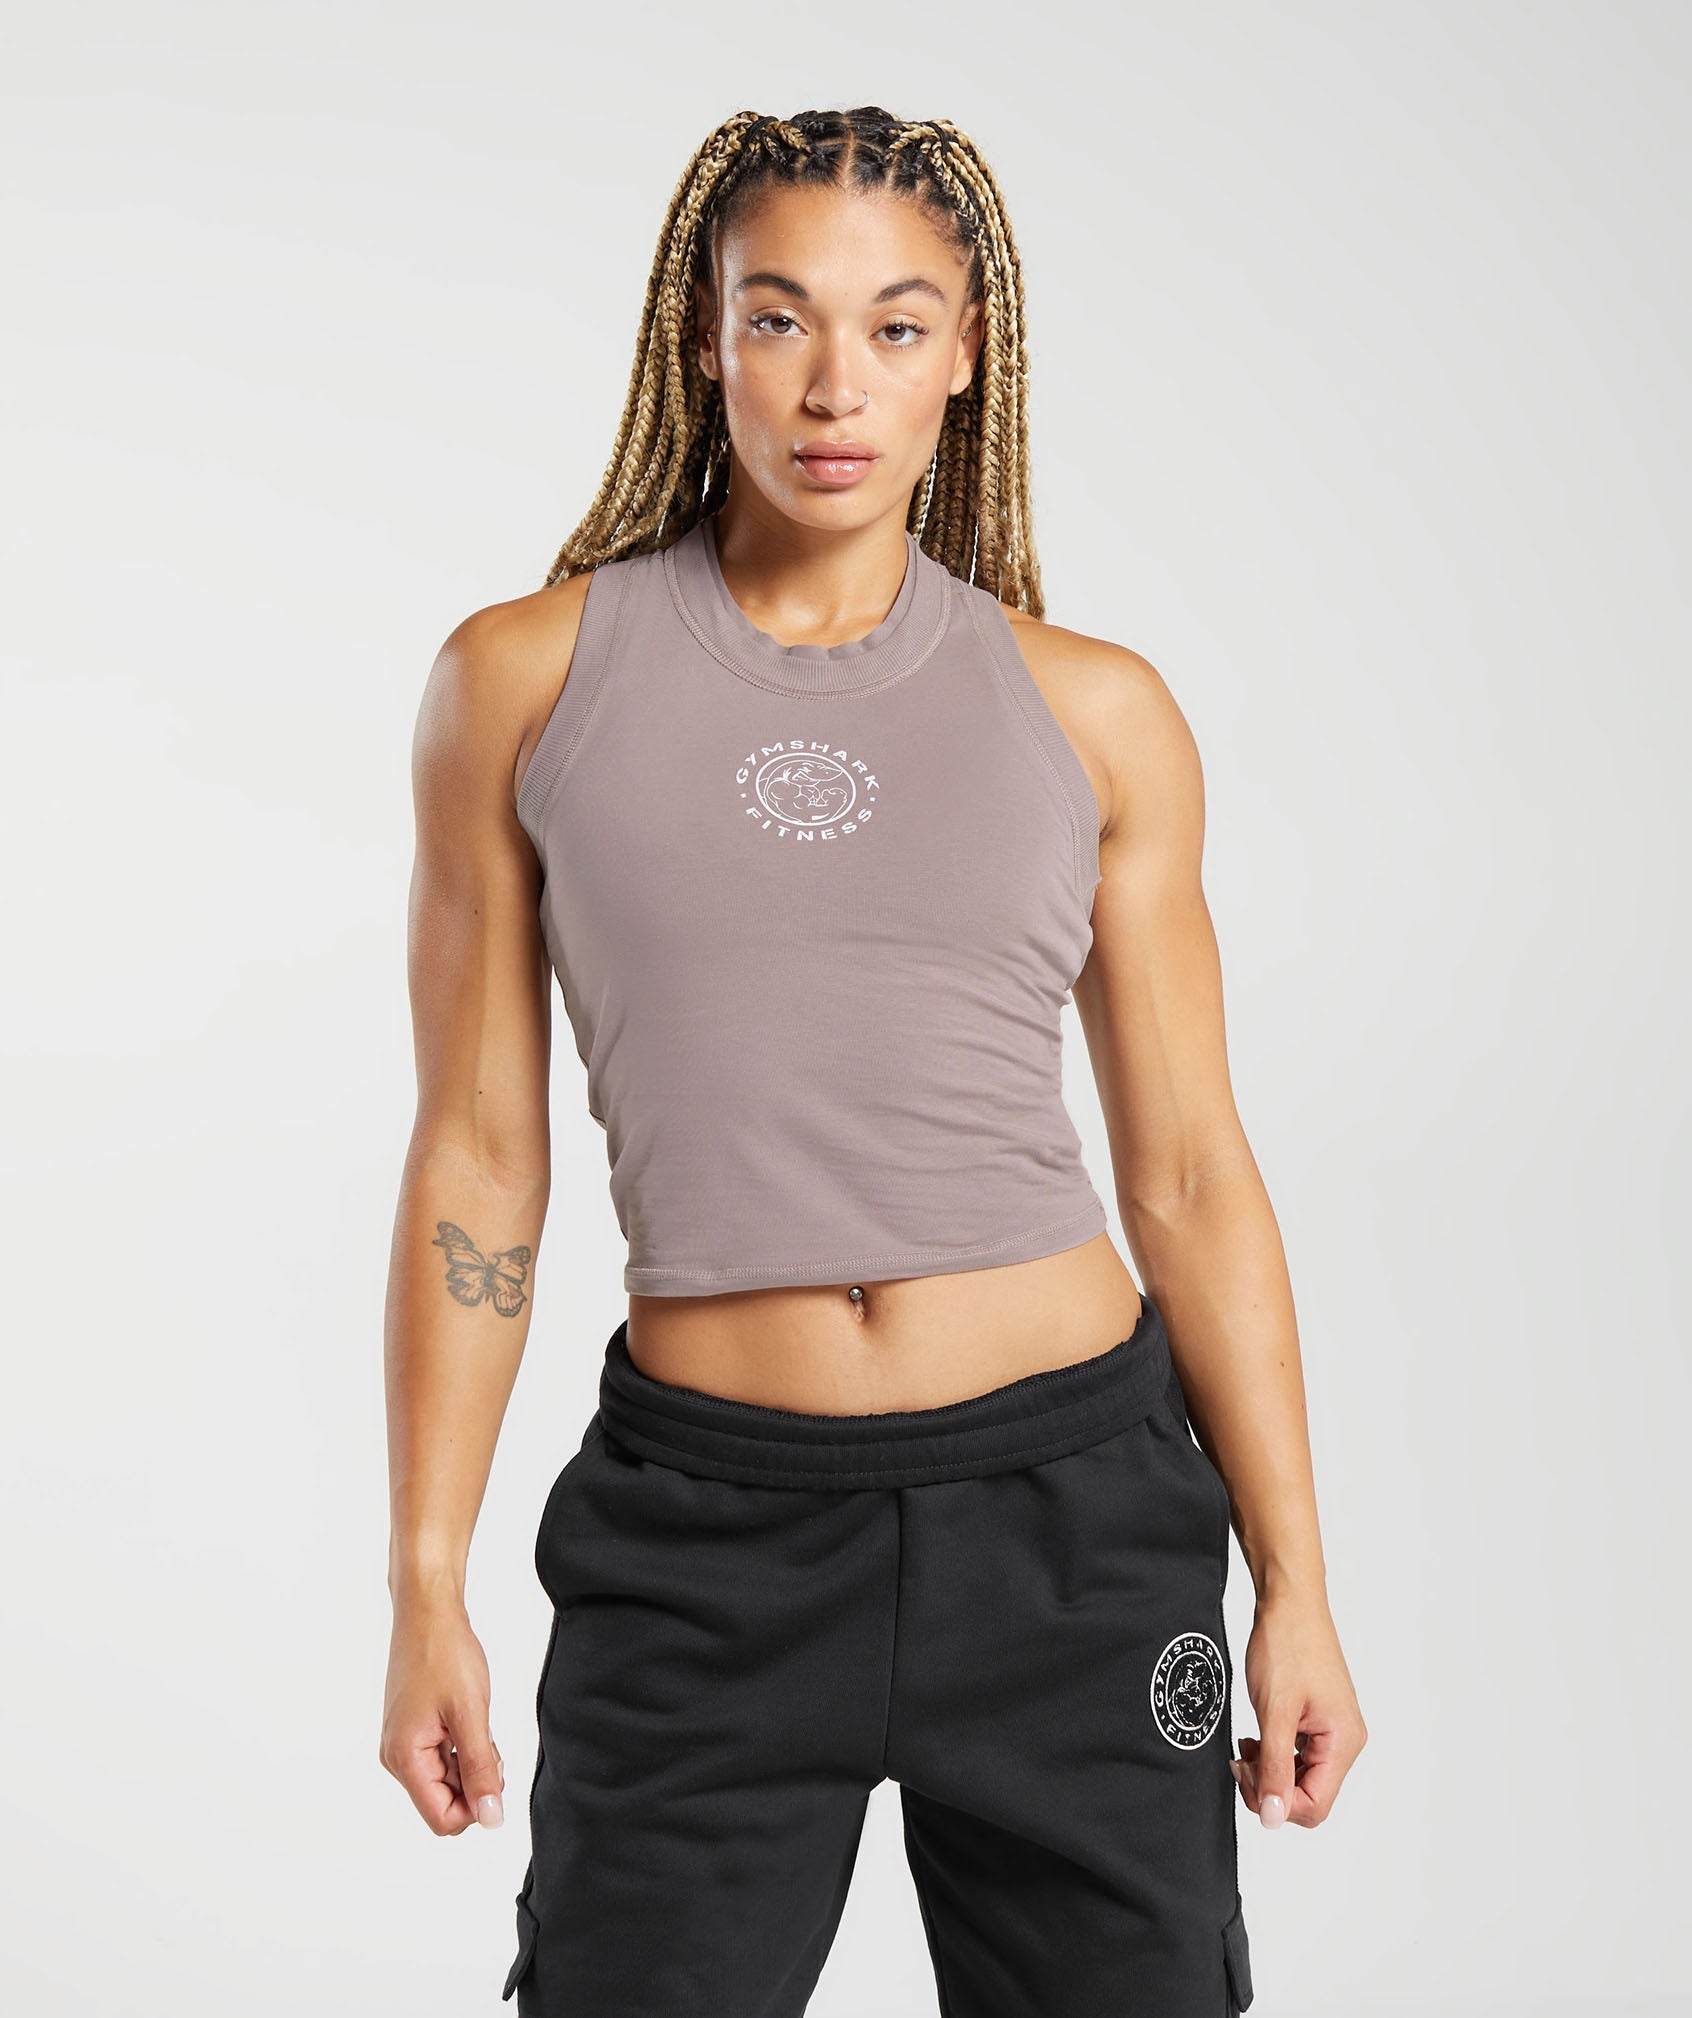 Shop Gymshark  High Quality Activewear and Workout Apparel